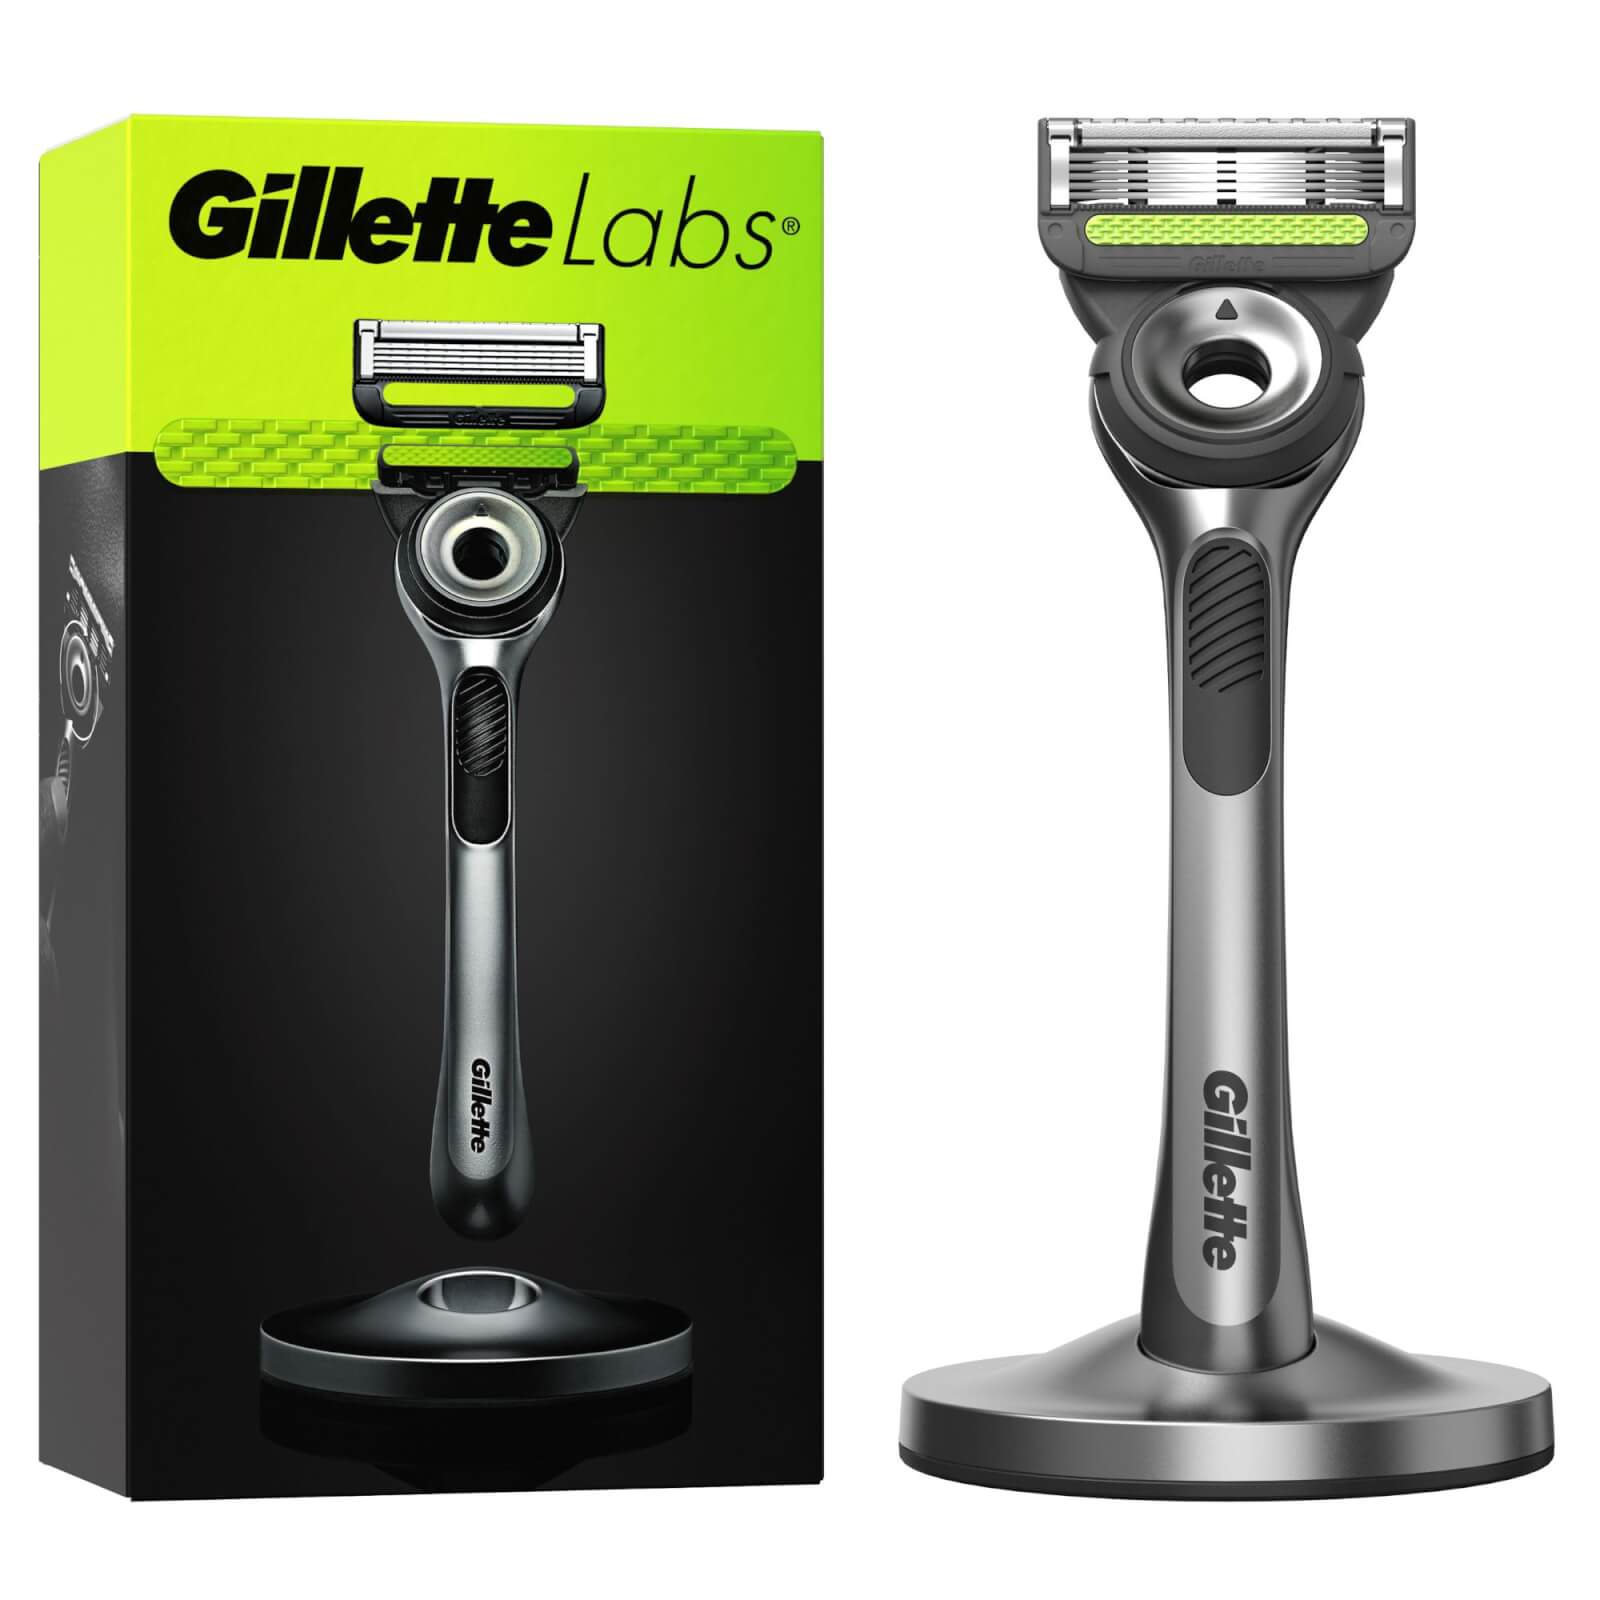 Gillette Labs Razor with Exfoliating Bar Silver